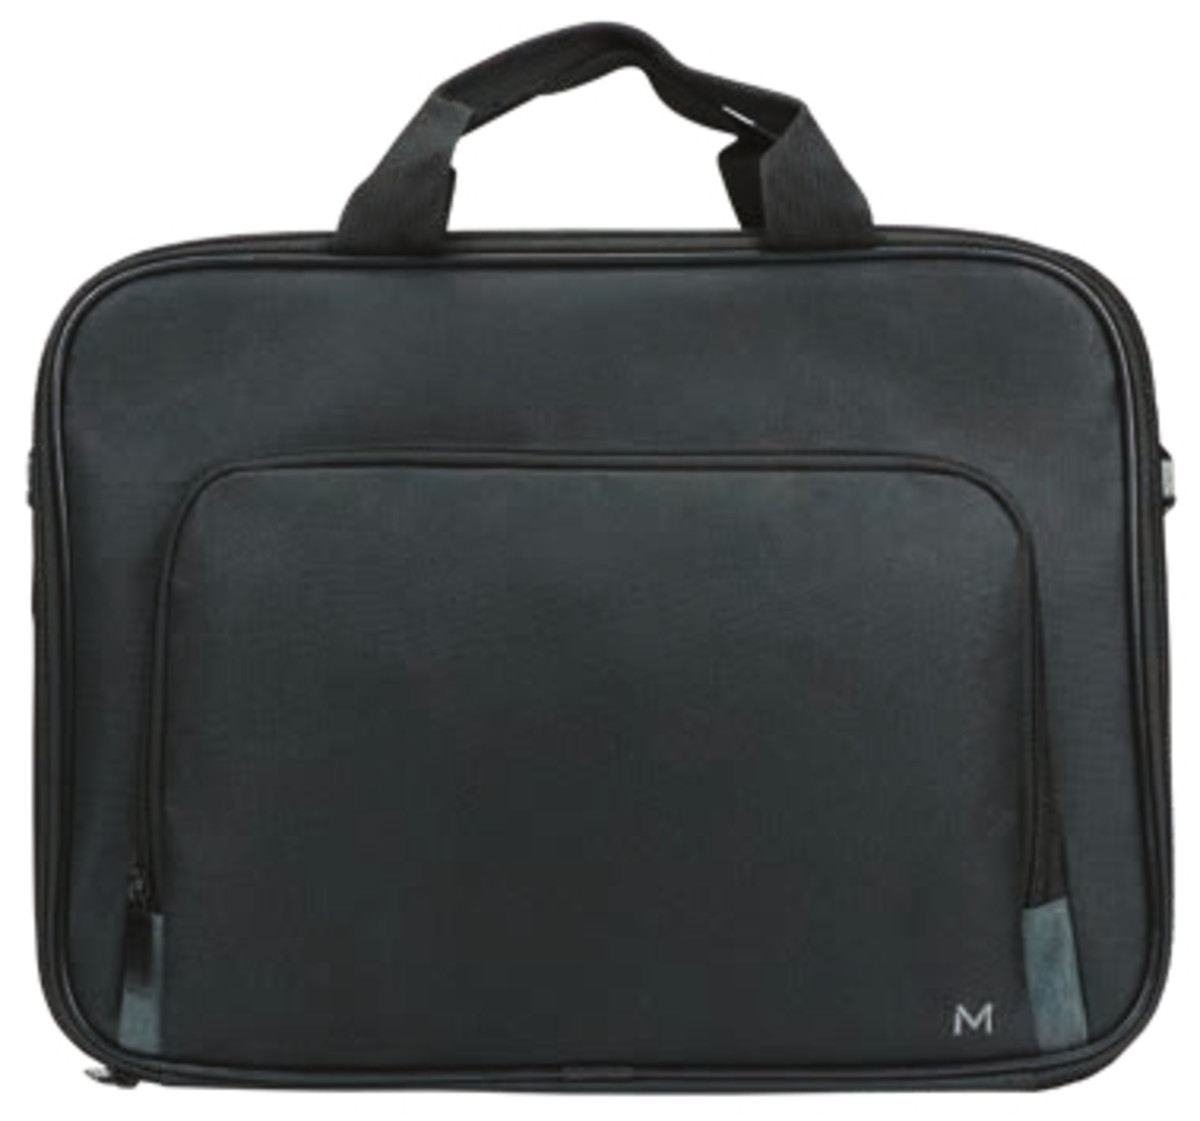 TheOne Briefcase zipped pocket 14-15.6